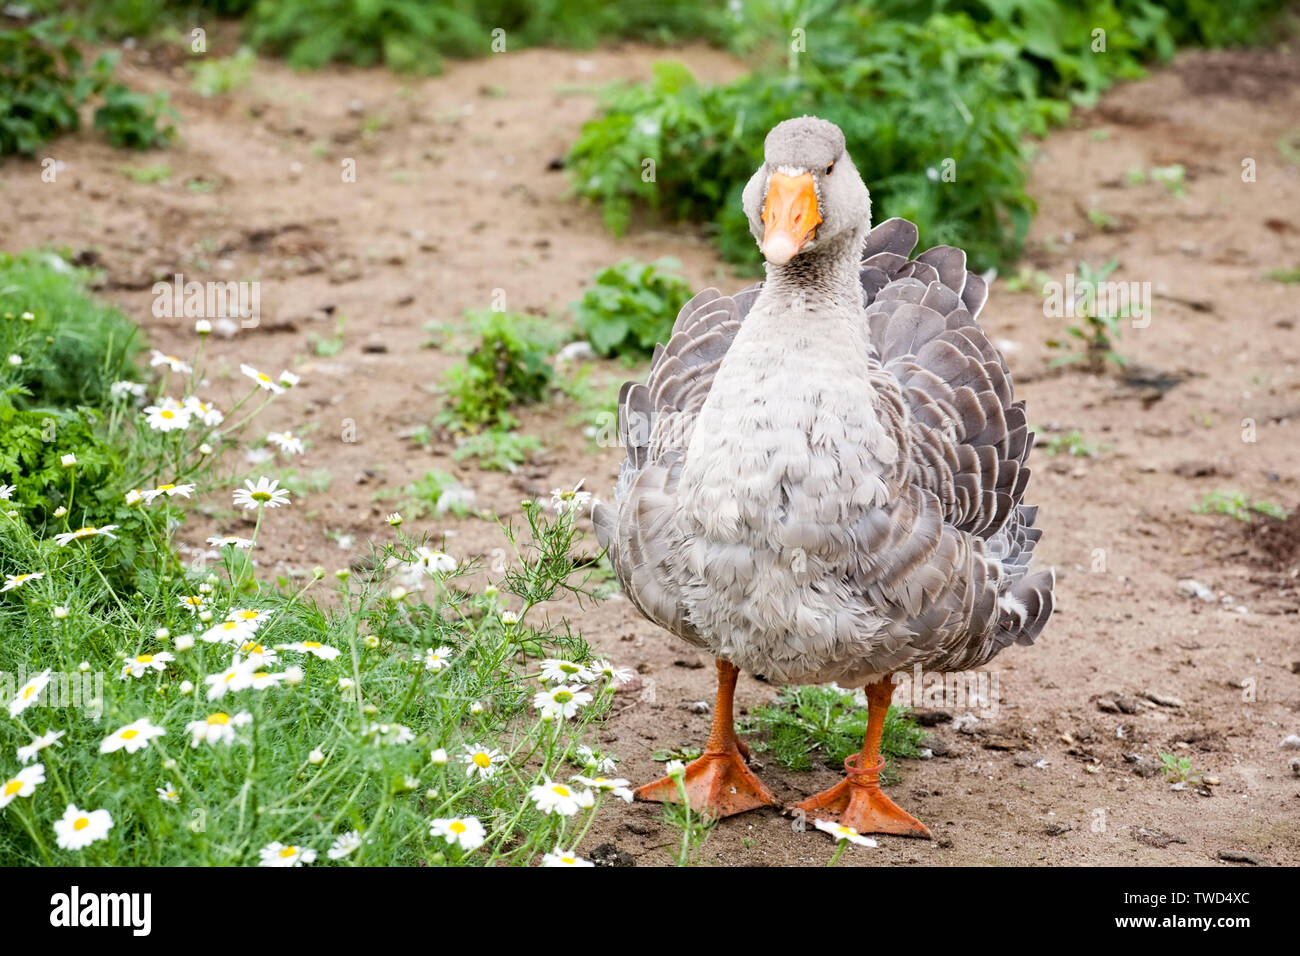 gray fat goose full-size closeup view on summer green background Stock Photo